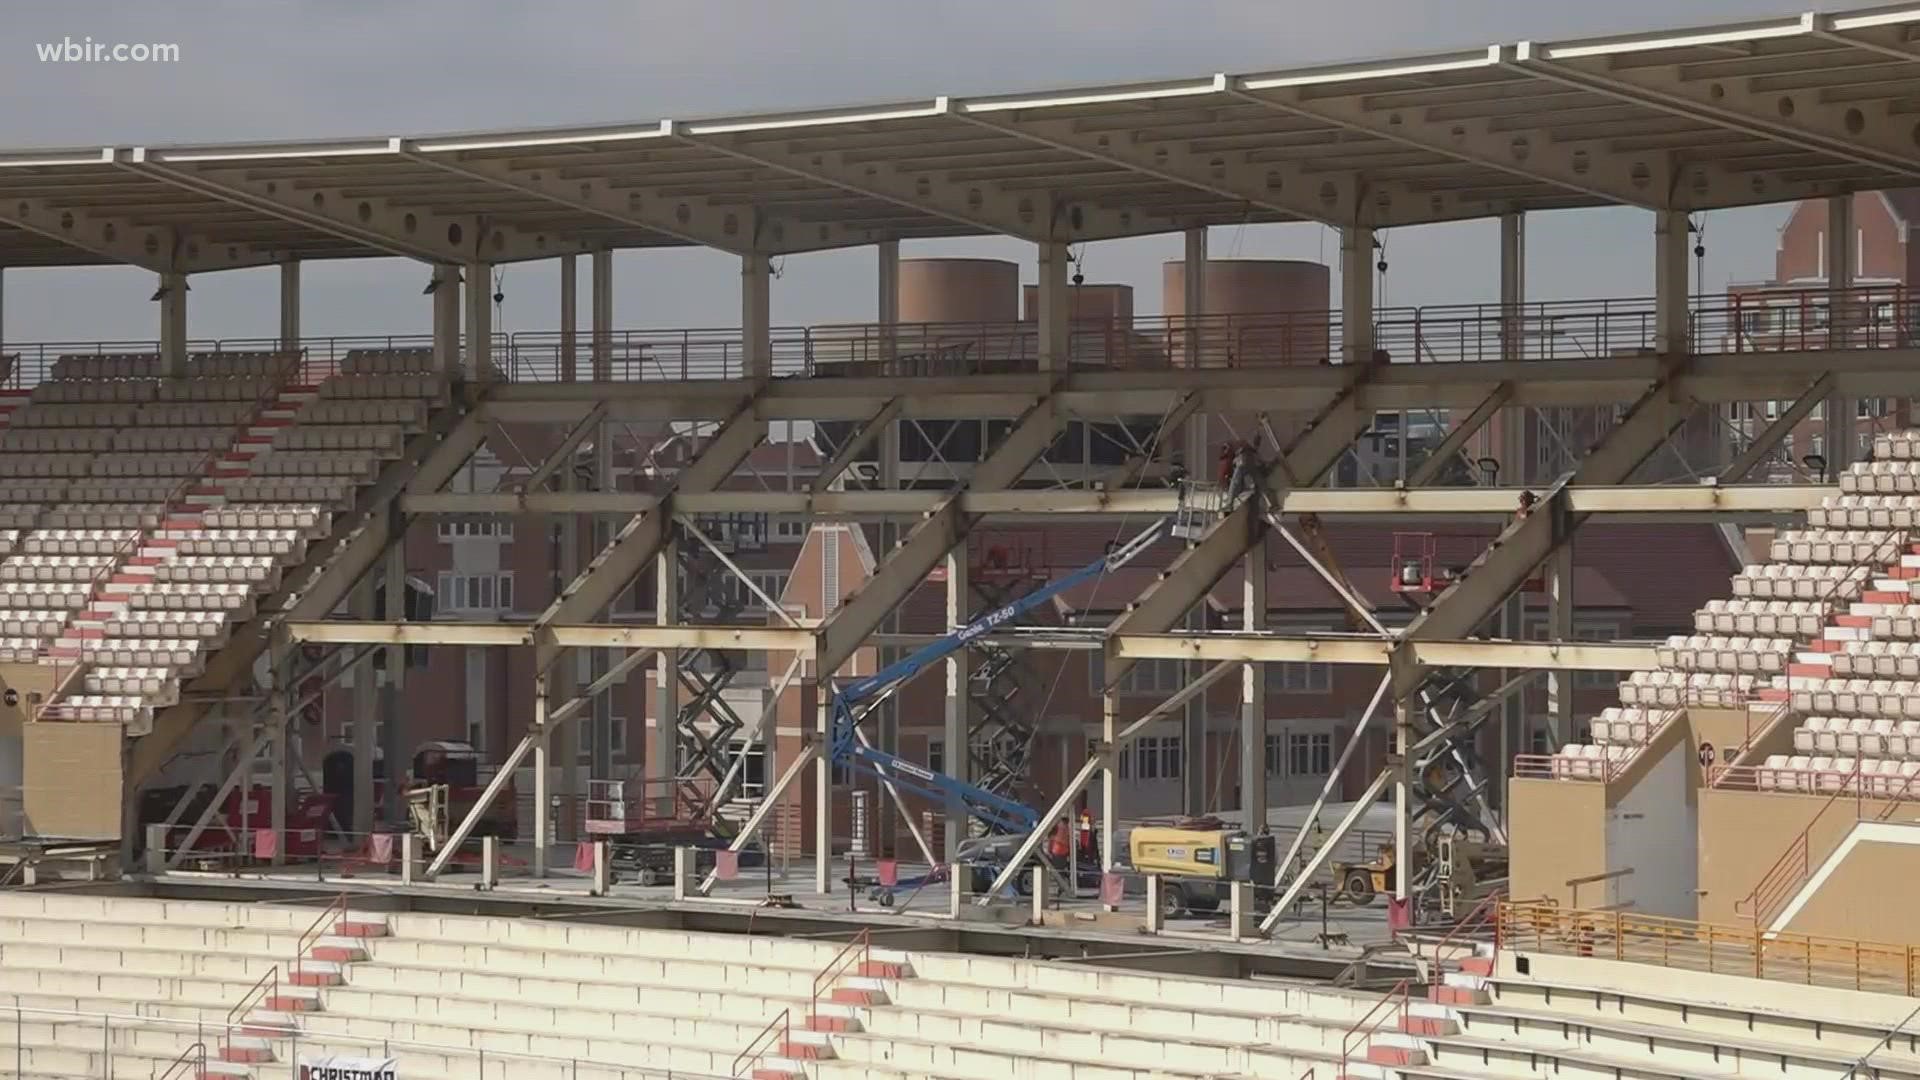 The project as a whole will take years to finish, but there are two major renovations scheduled to be finished by the upcoming football season.